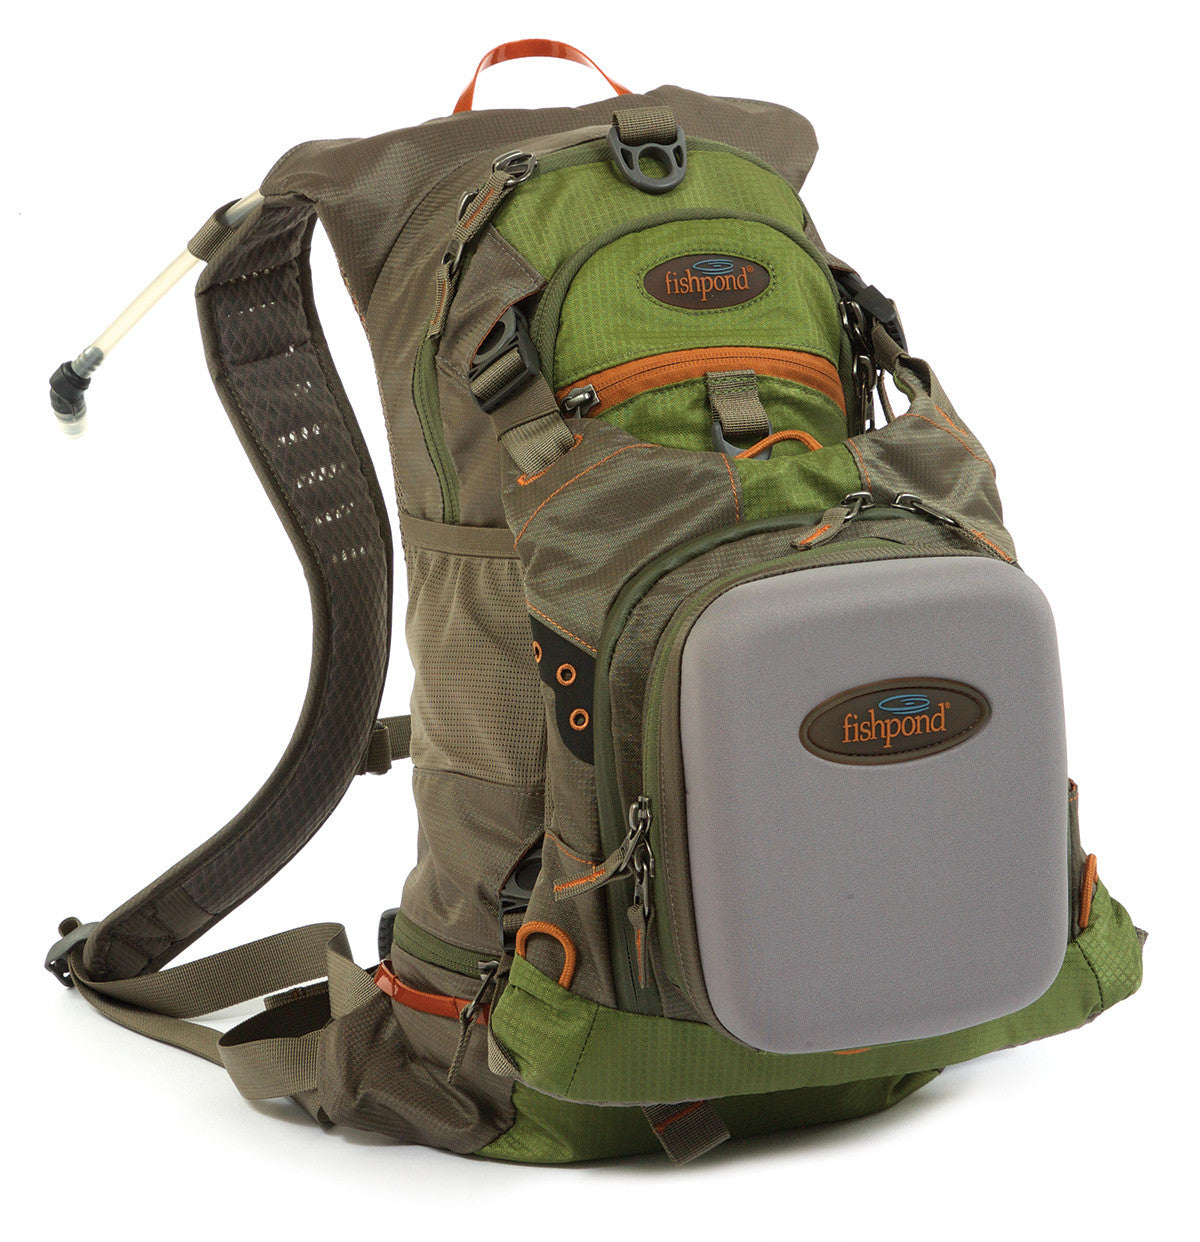 Fishpond Oxbow Chest/Backpack - Wilkinson Fly Fishing LLC